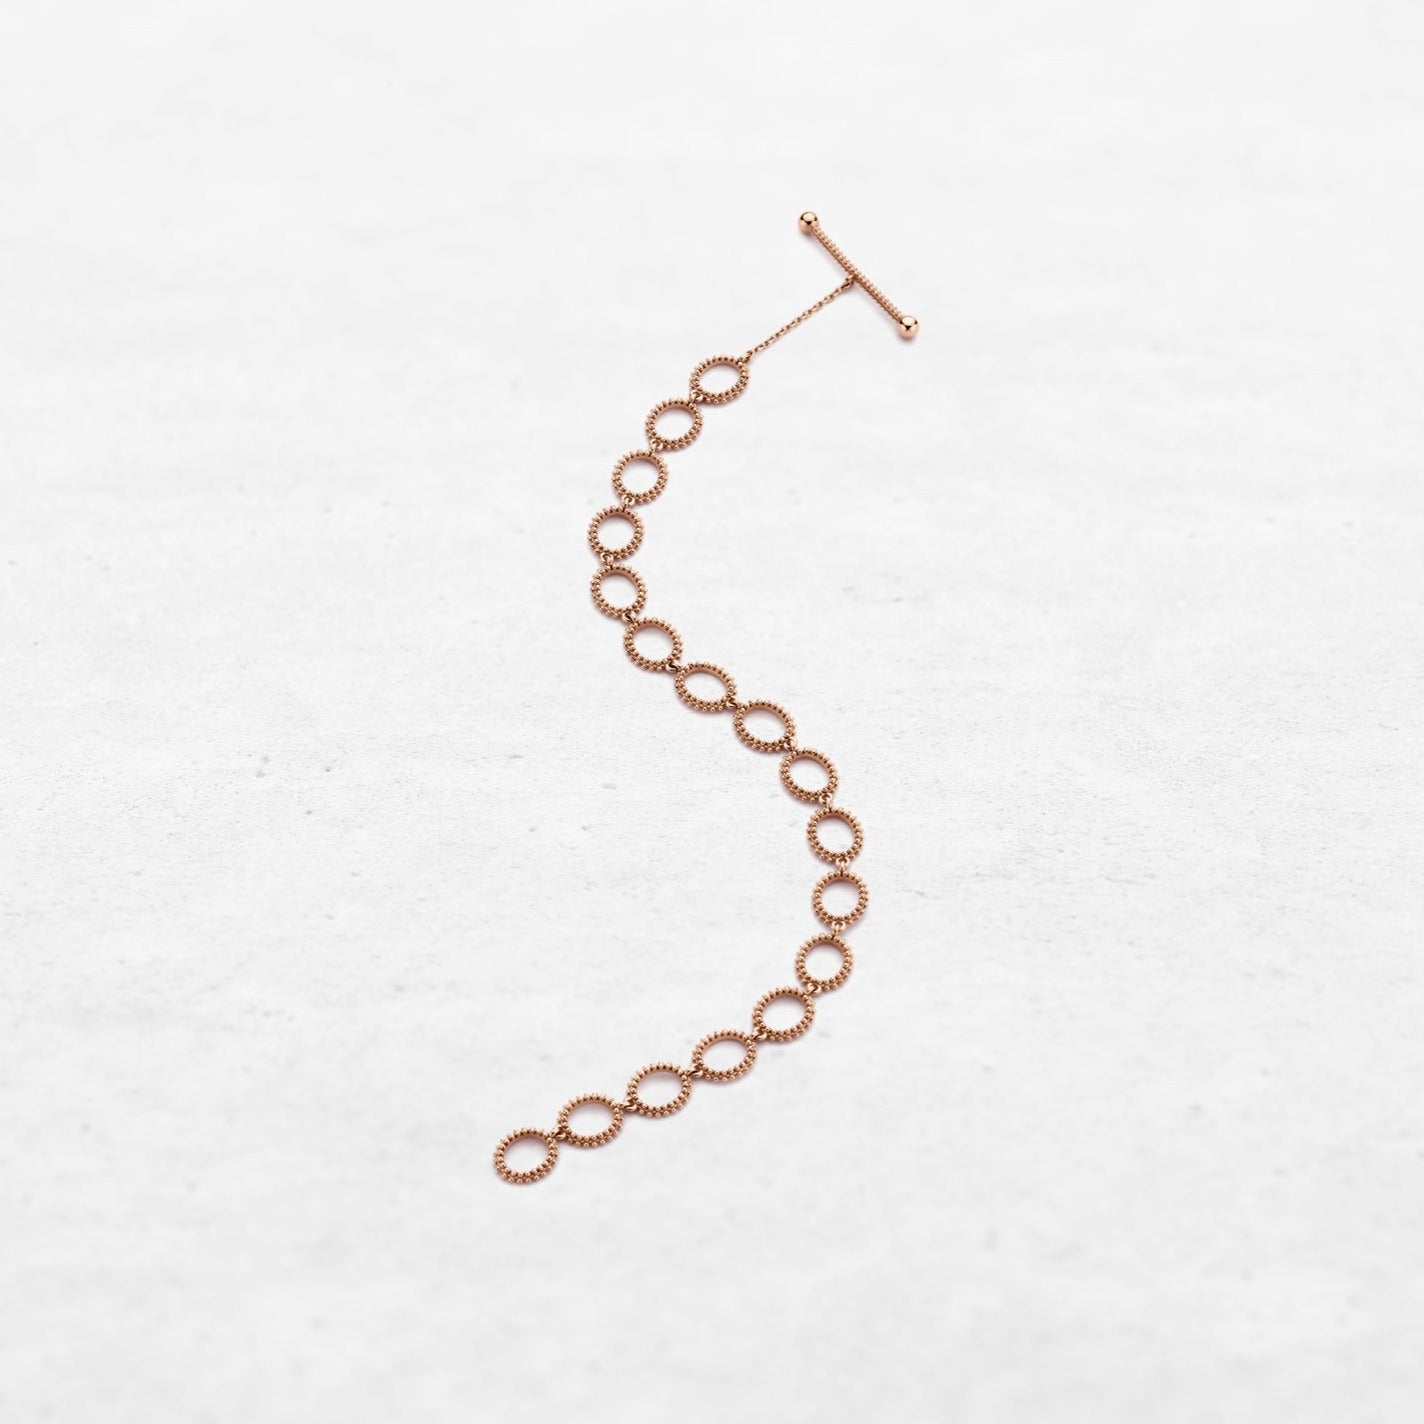 Circular bracelet in rose gold made by O! Jewelry